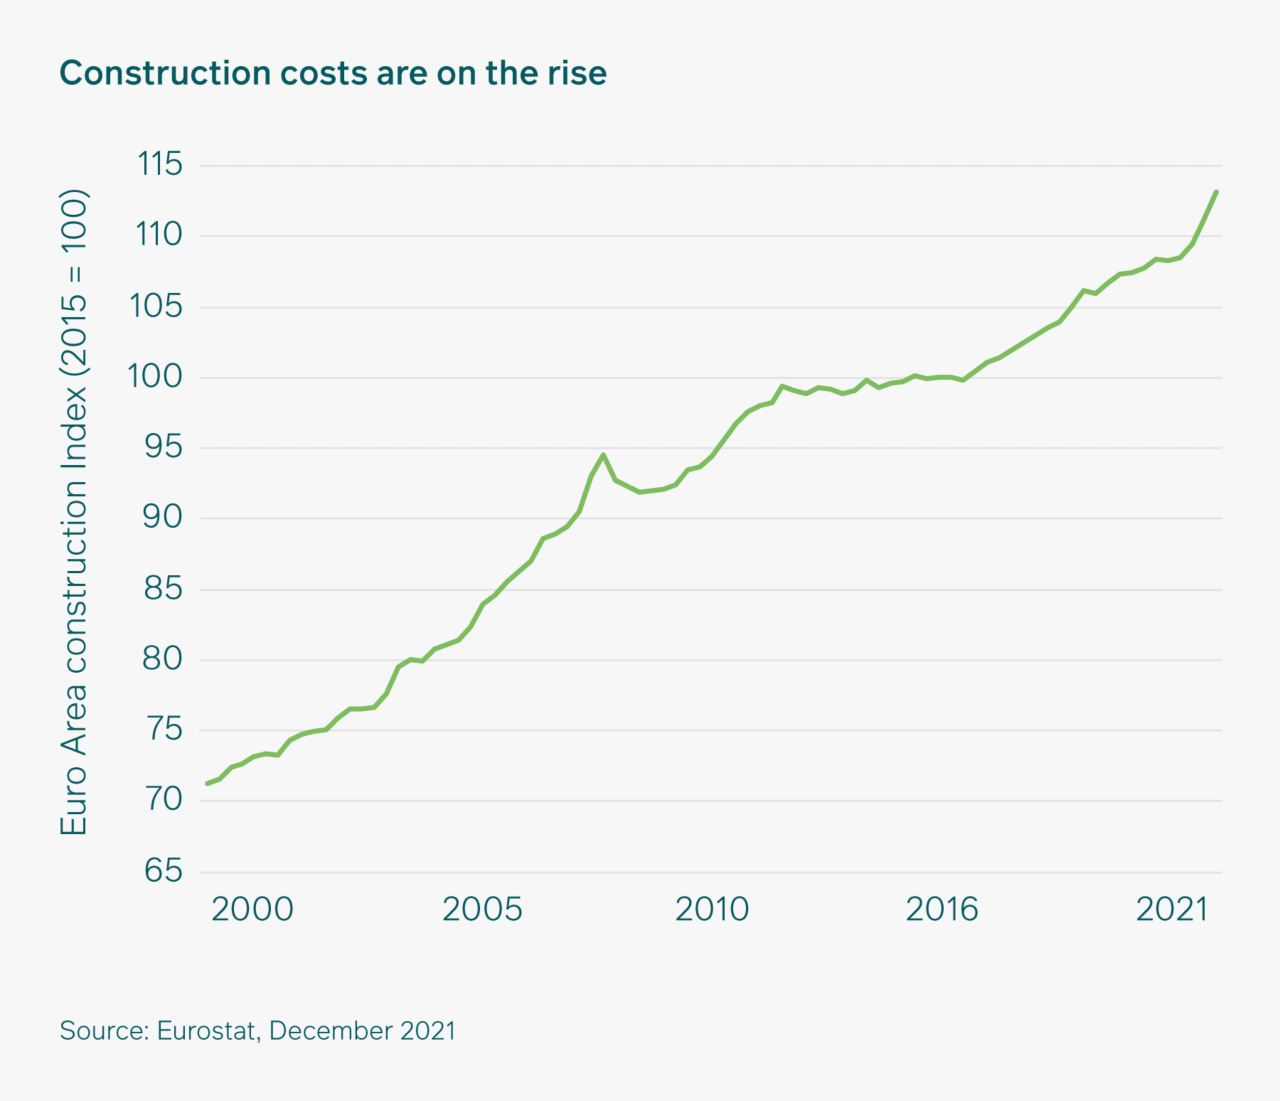 Construction costs on the rise